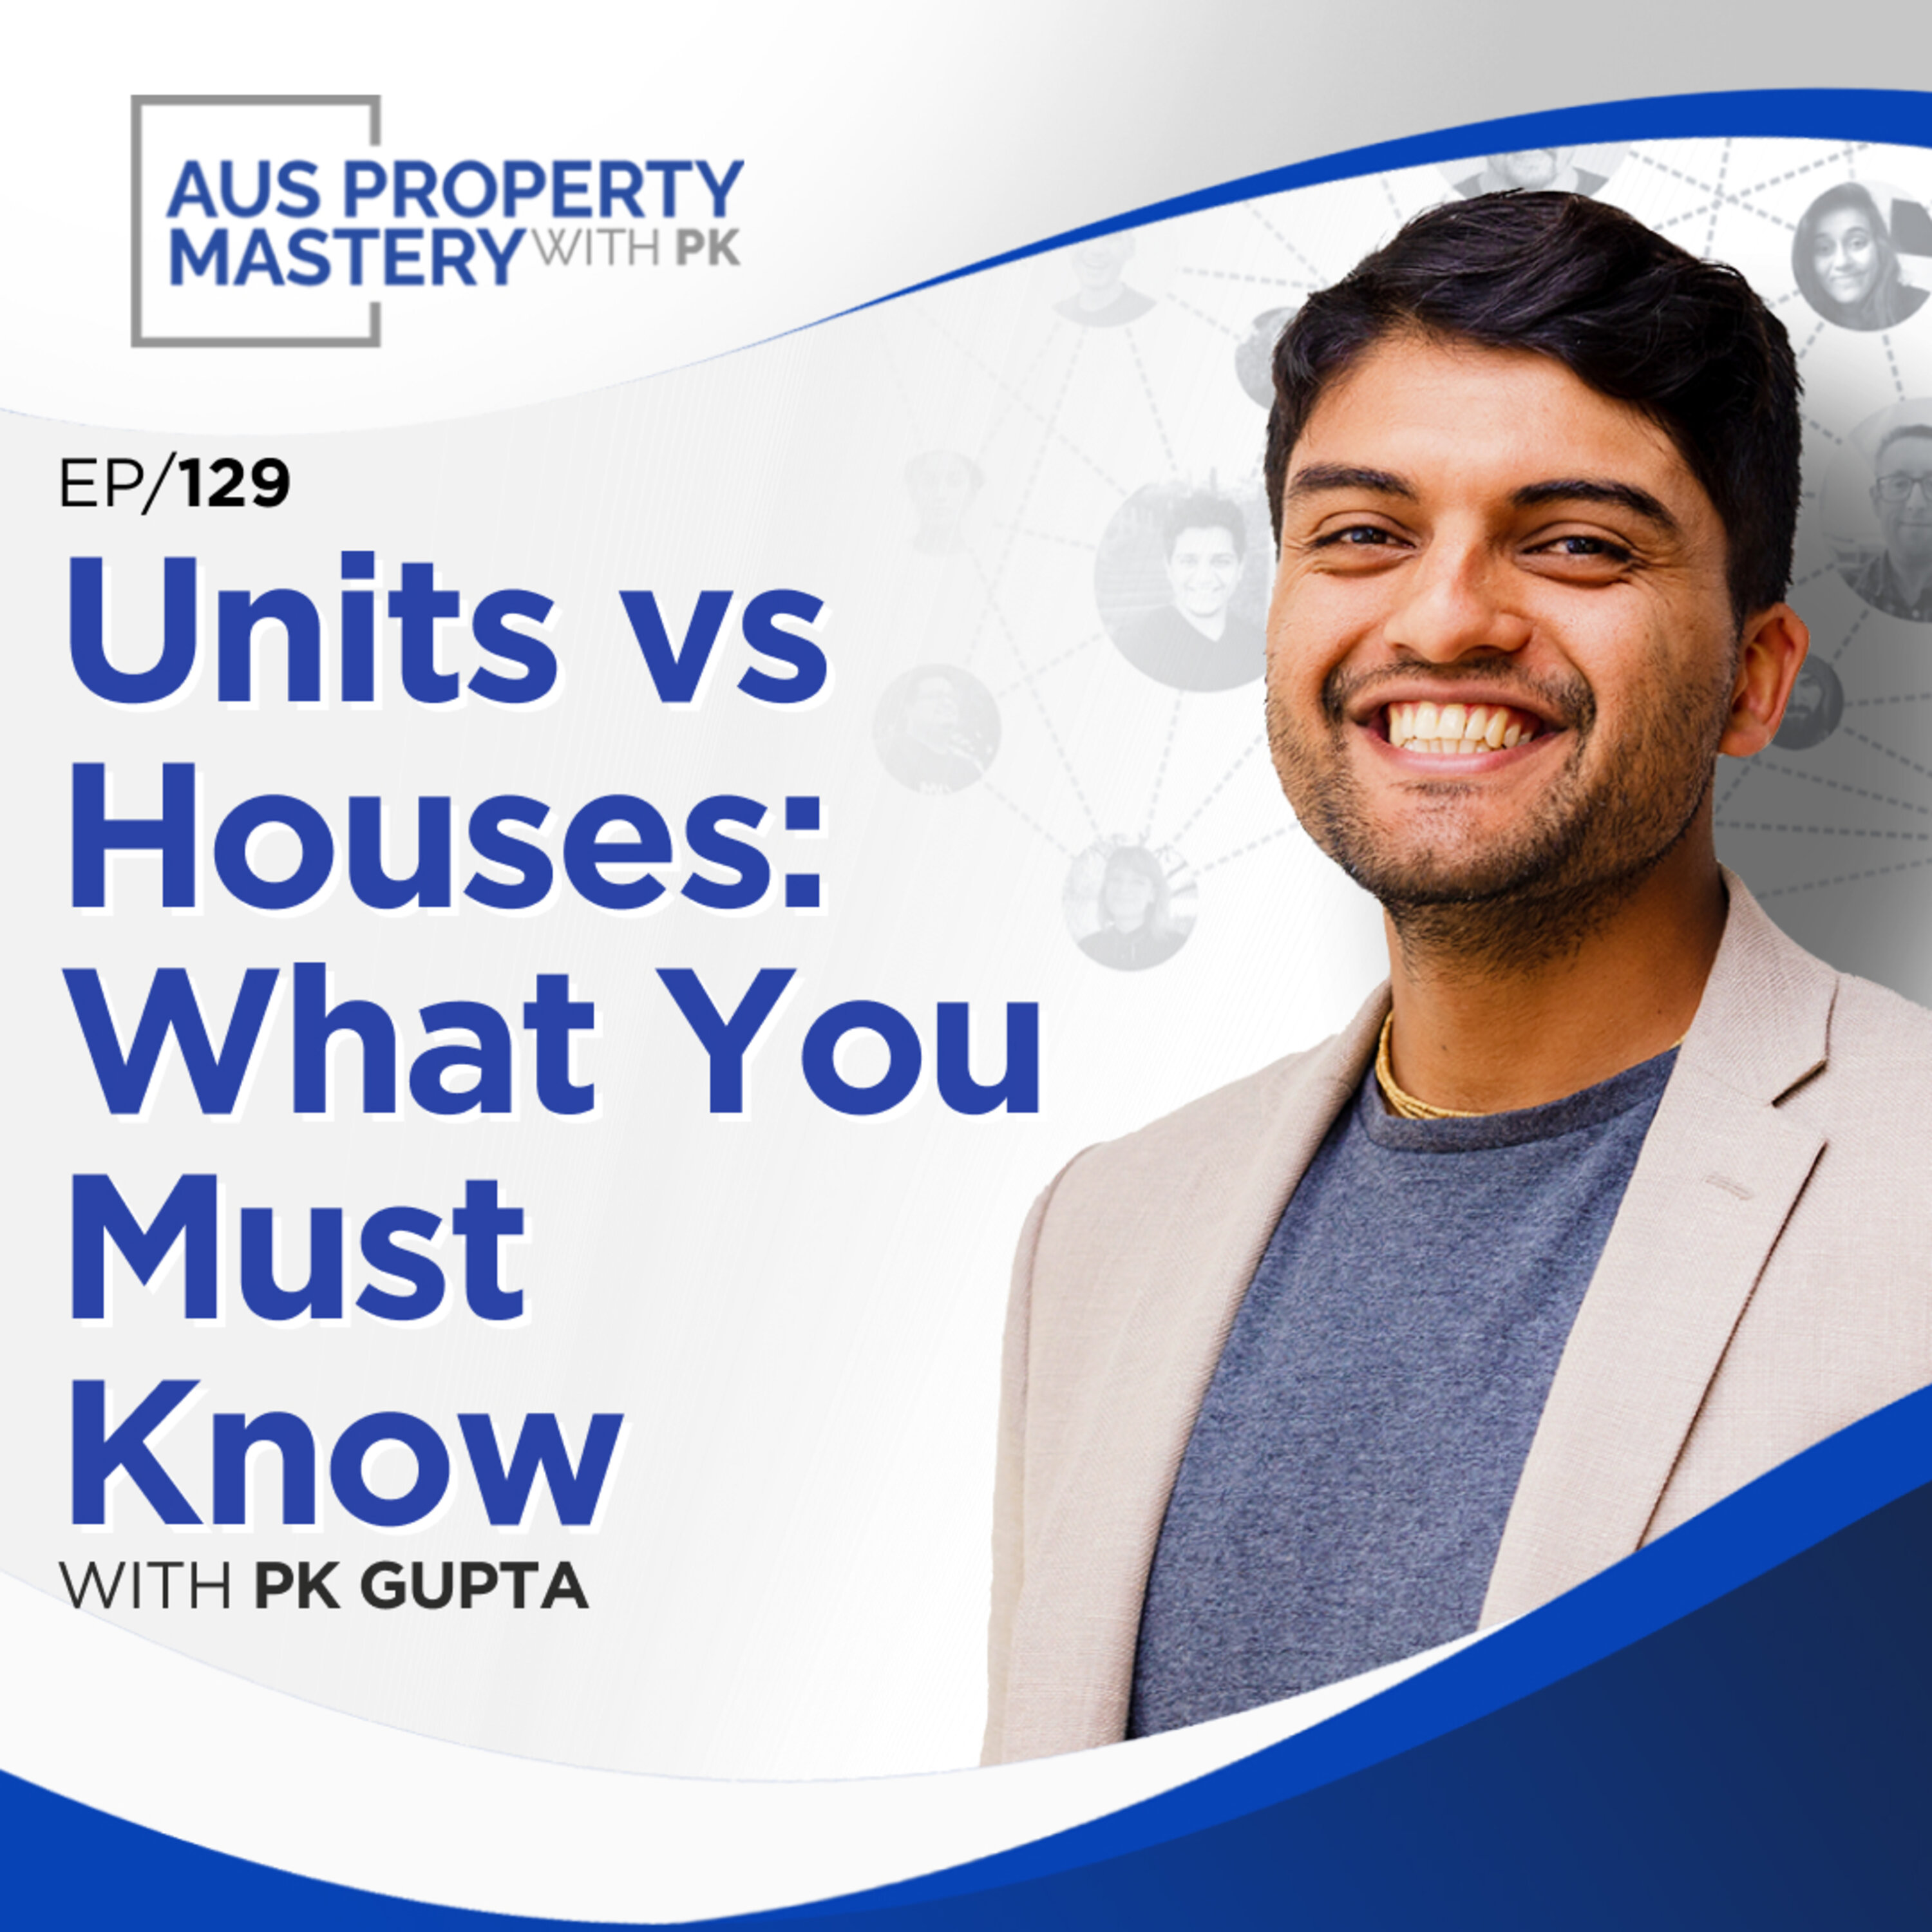 Units vs Houses: What You Must Know